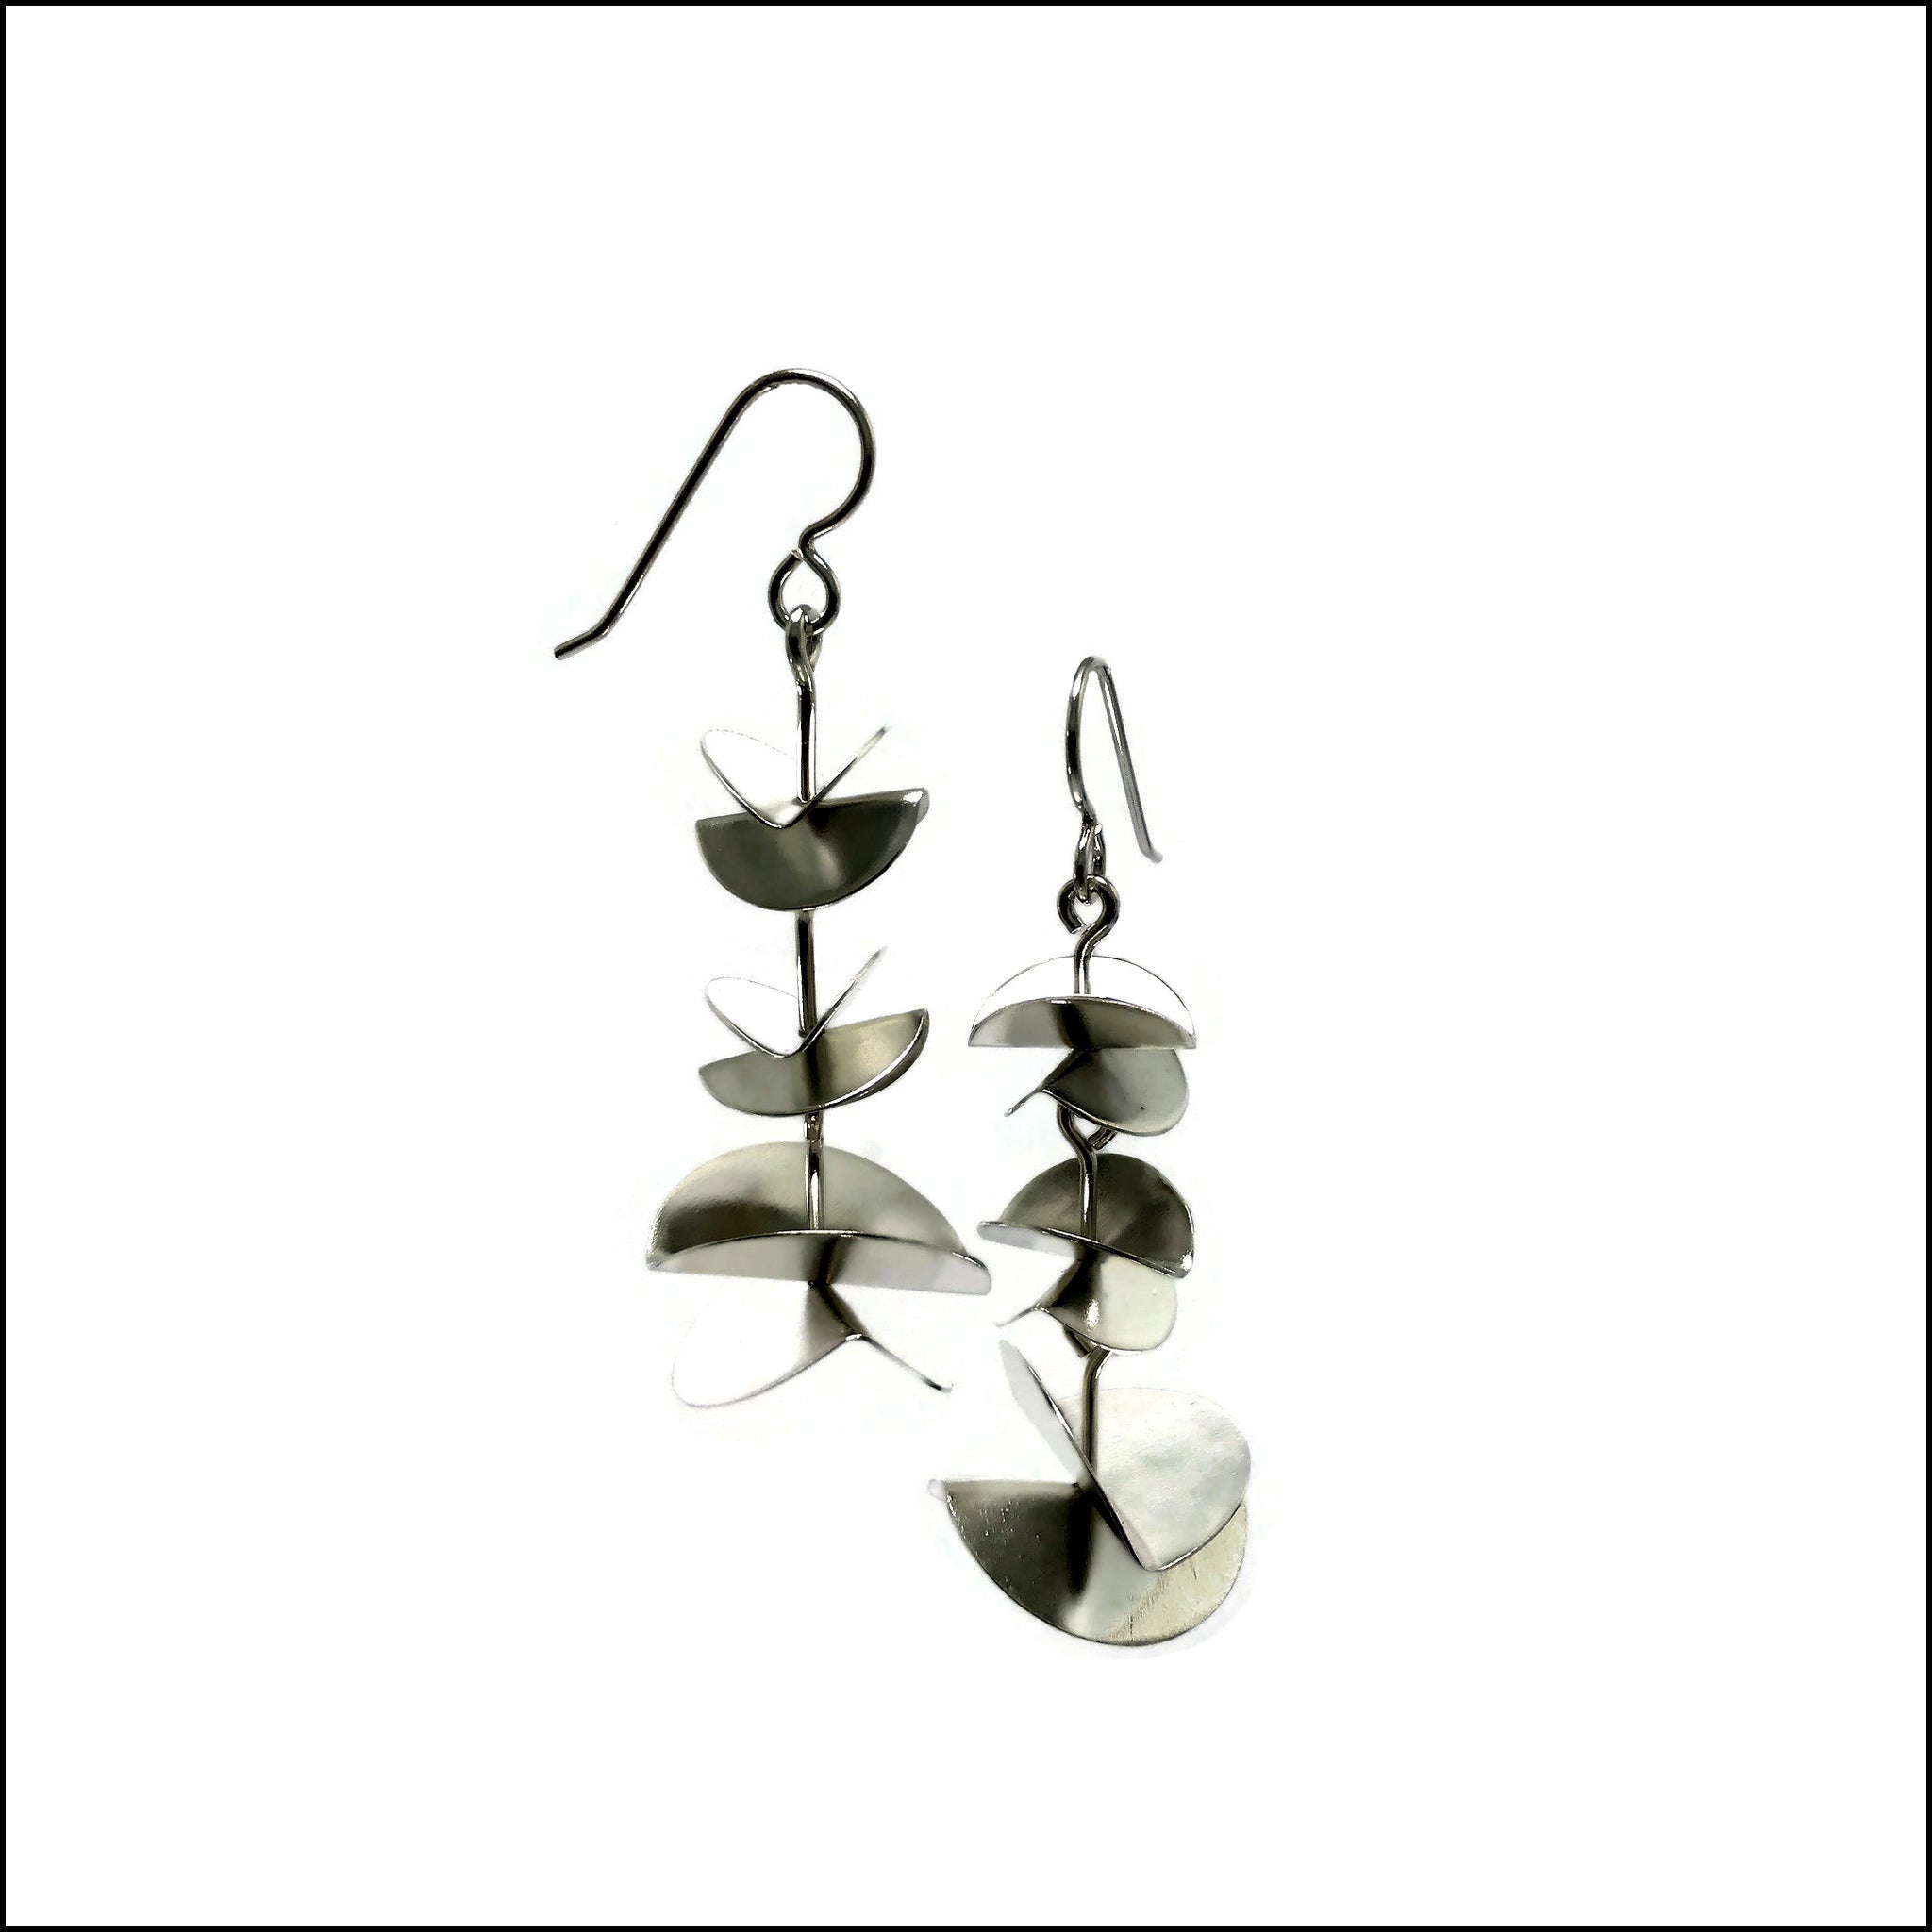 3 tiered folded discs earrings  - made to order